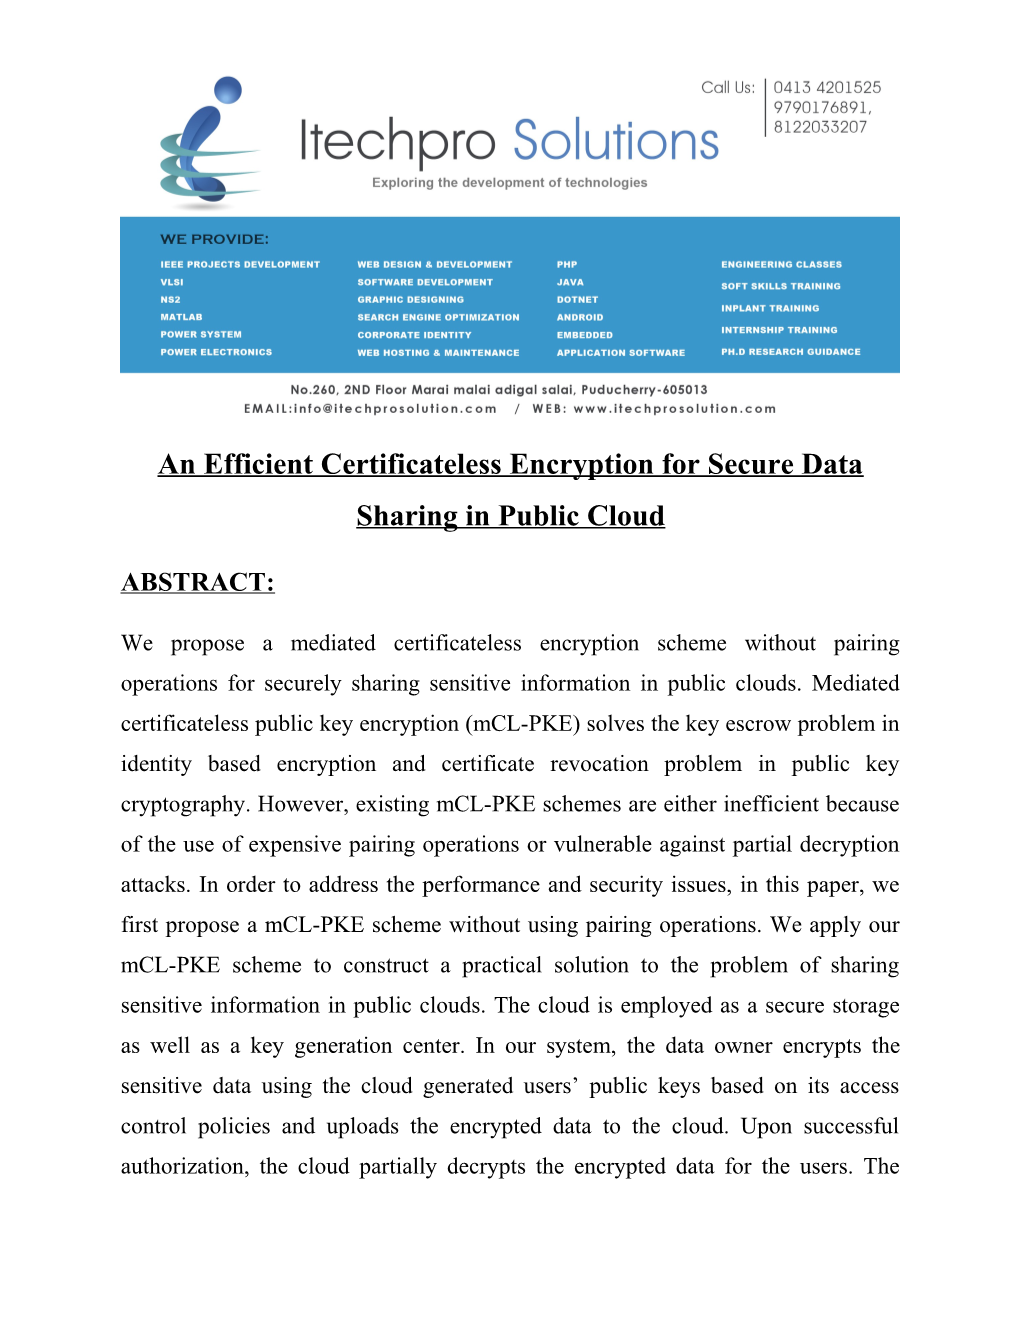 An Efficient Certificateless Encryption for Secure Data Sharing in Public Cloud